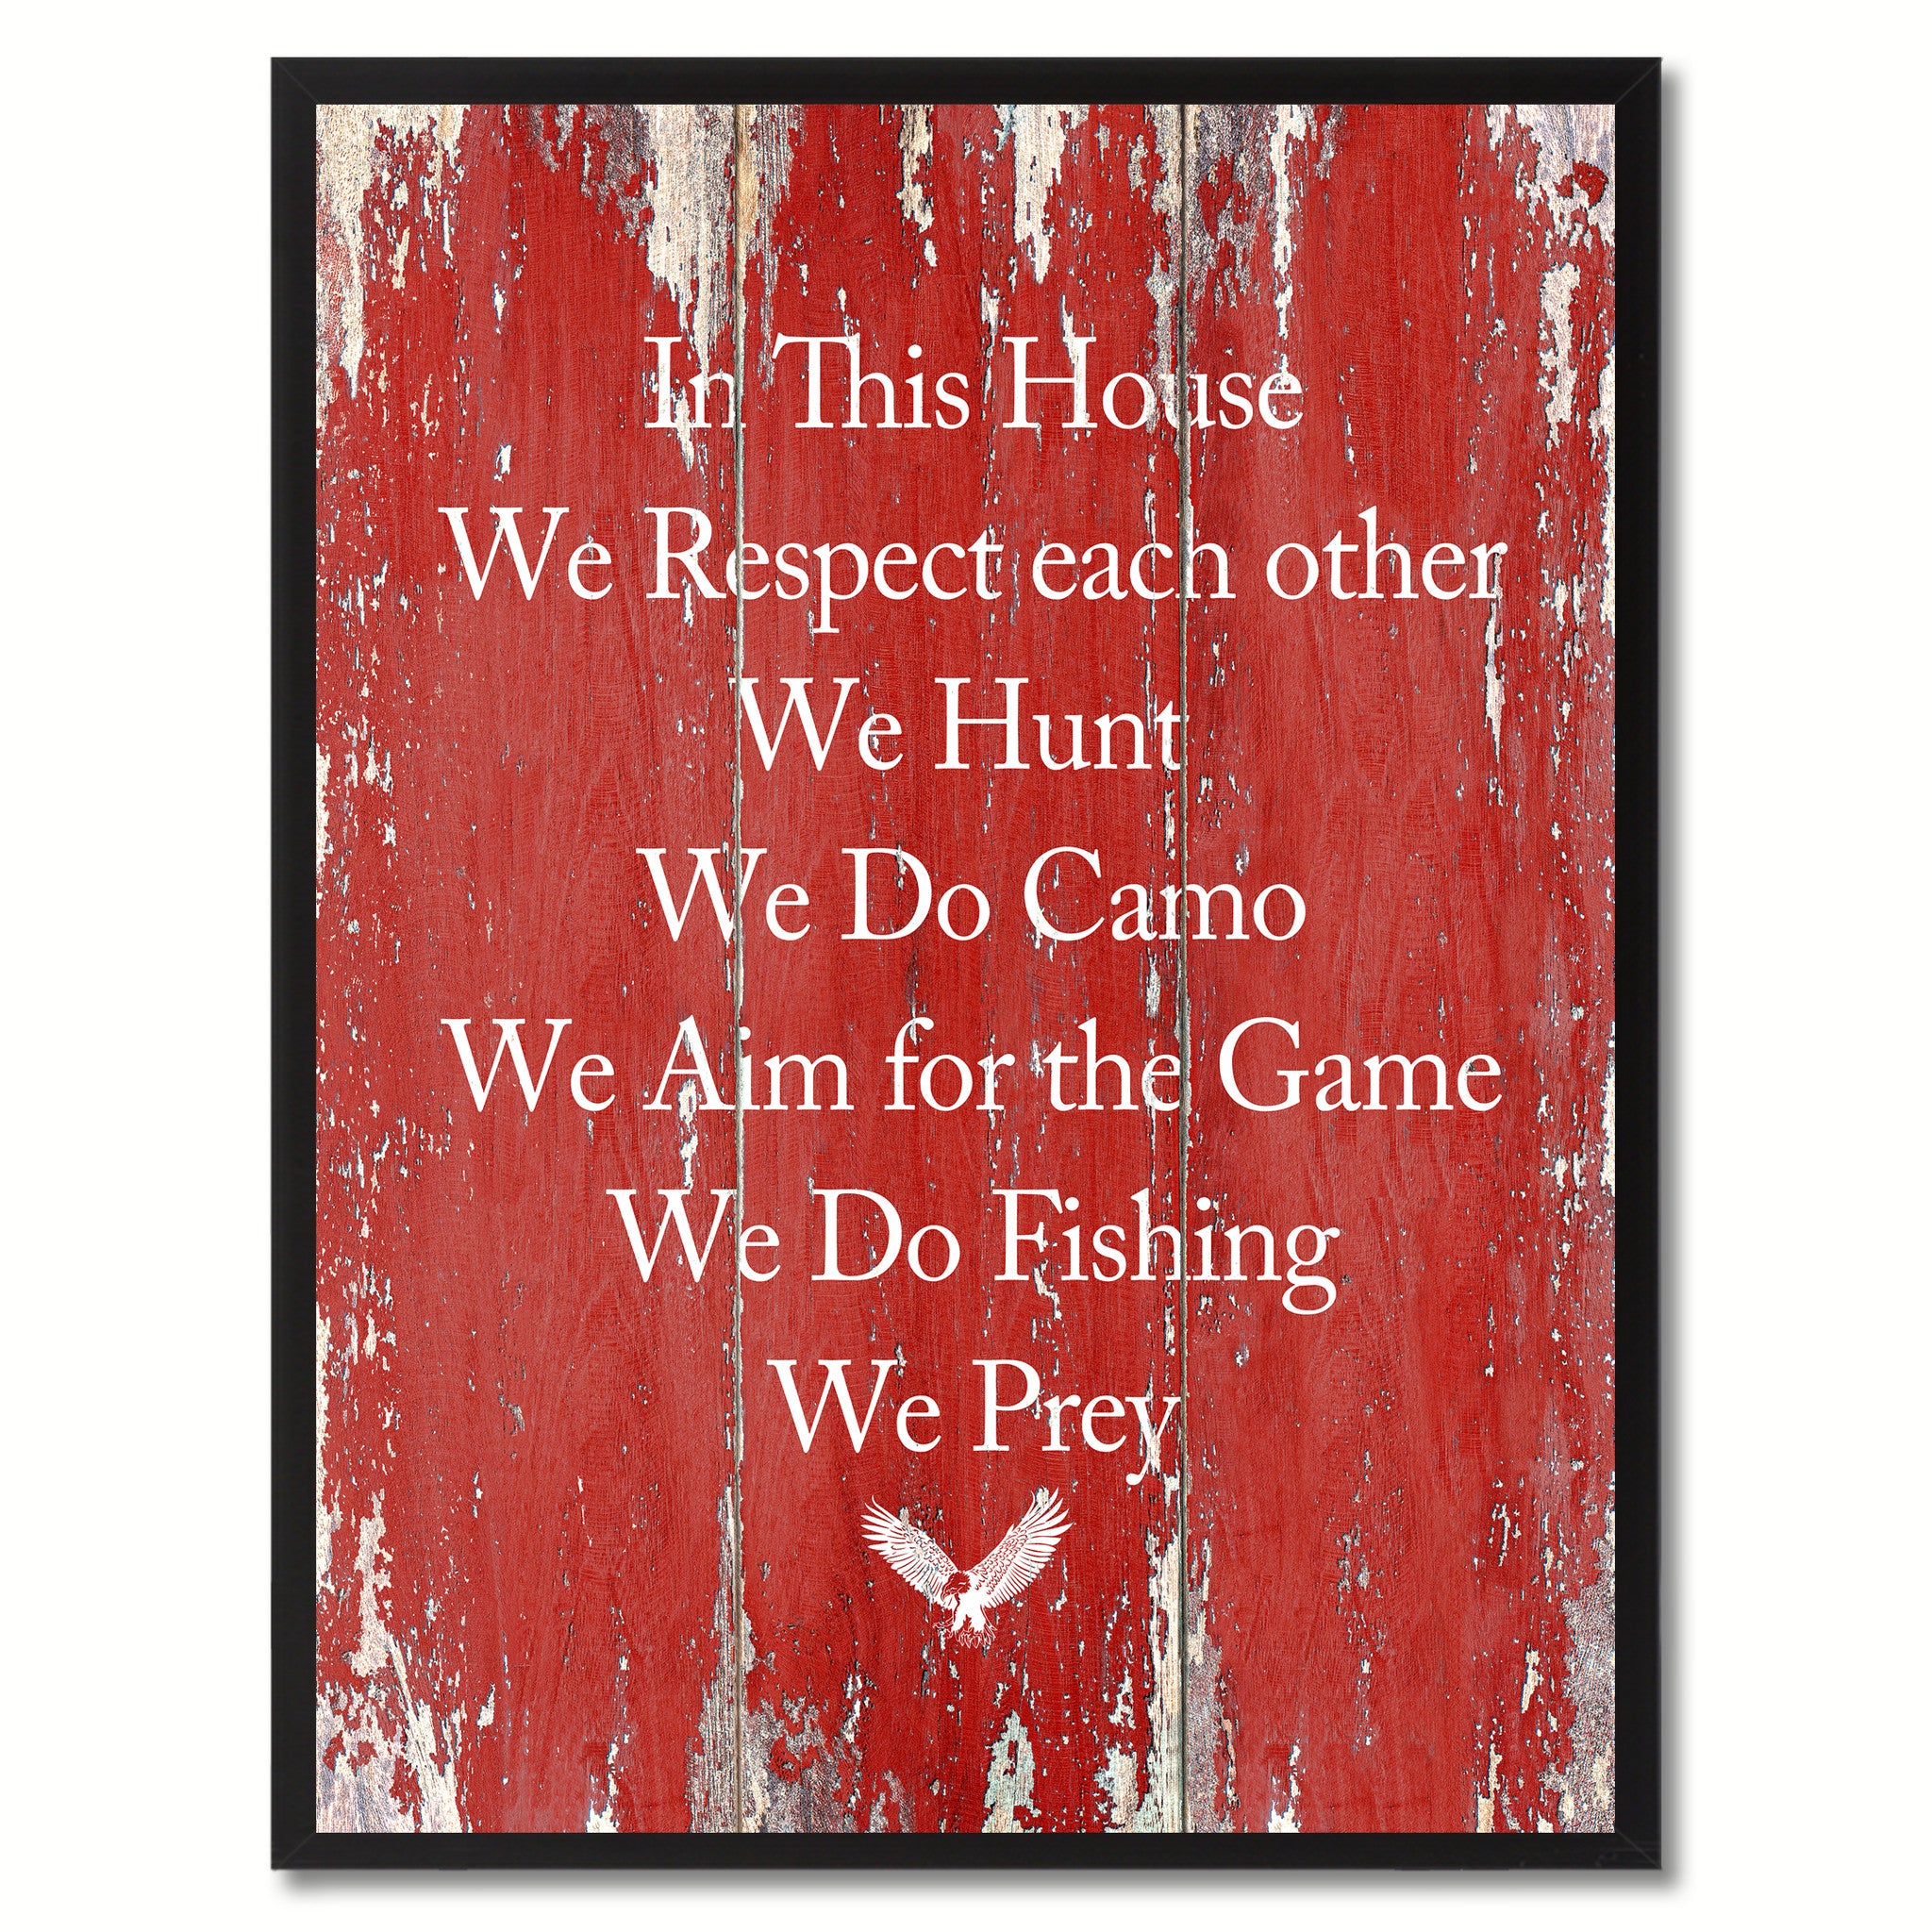 In This House We Respect Each Other Saying Canvas Print, Black Picture Frame Home Decor Wall Art Gifts